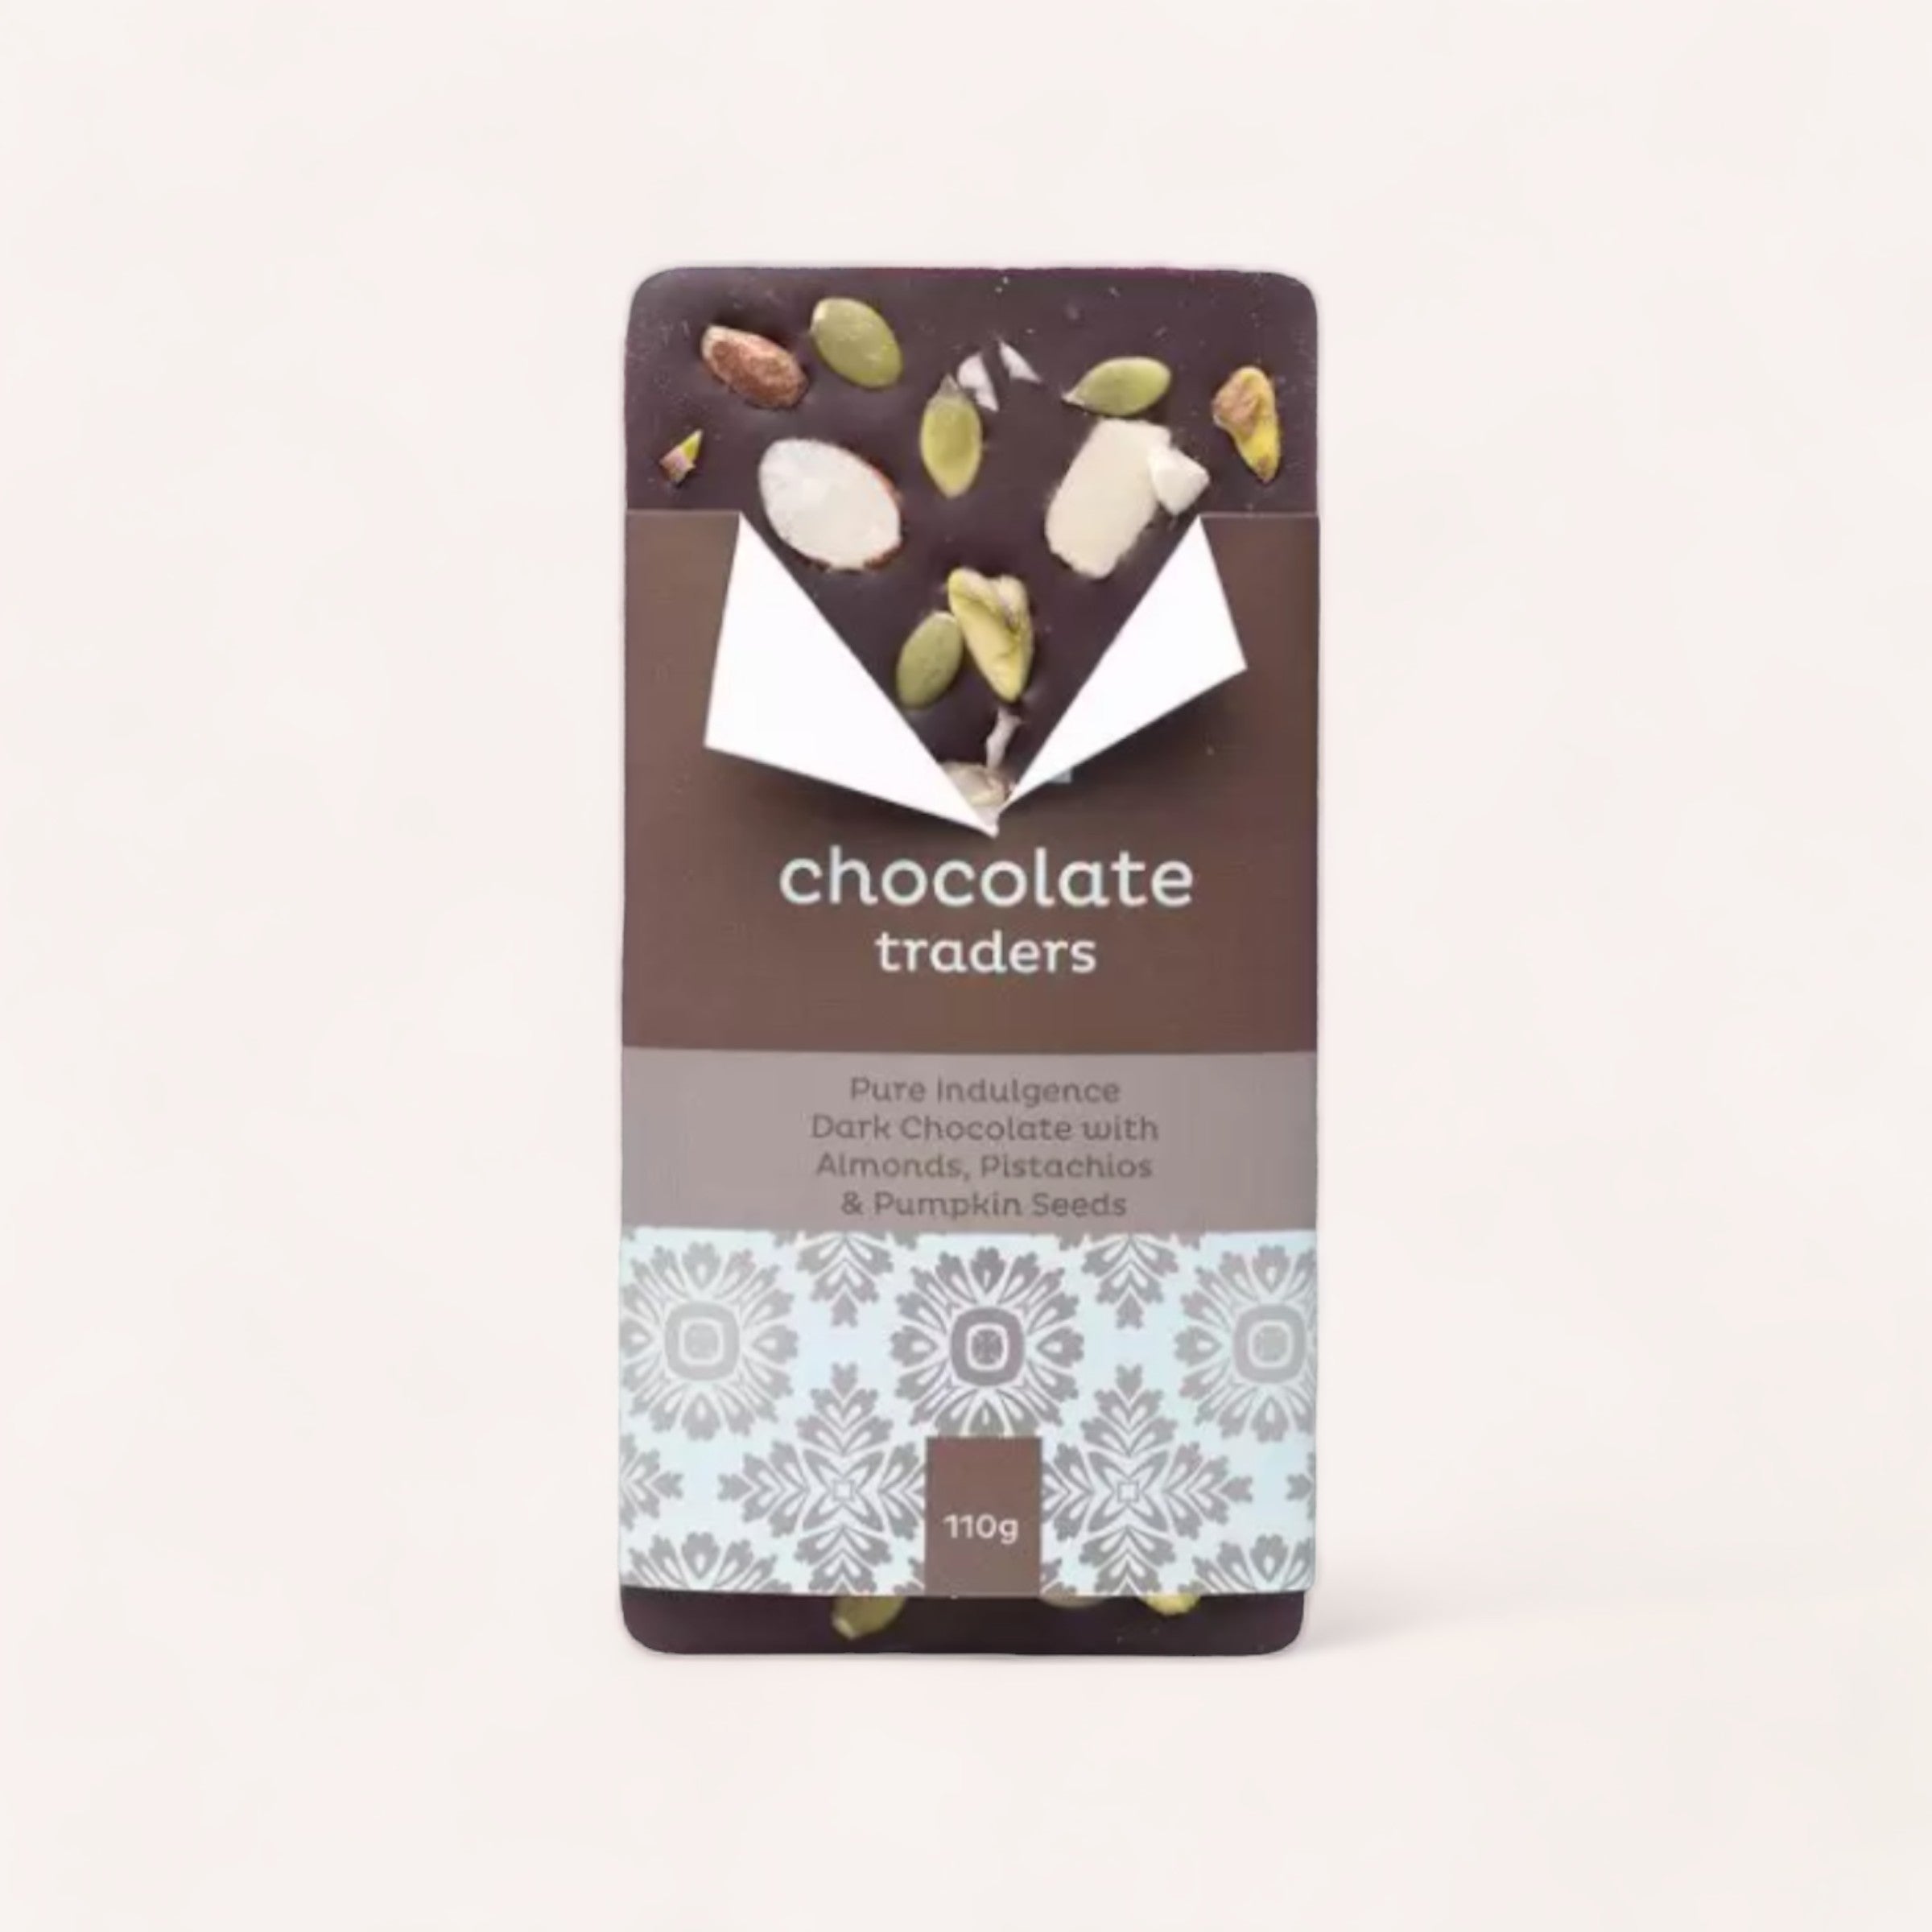 A hand-crafted Pure Indulgence Almonds, Pistachios & Pumpkin Seeds chocolate bar by Chocolate Traders in elegant packaging, promising a blend of pure indulgence with a hint of artisanal flair.